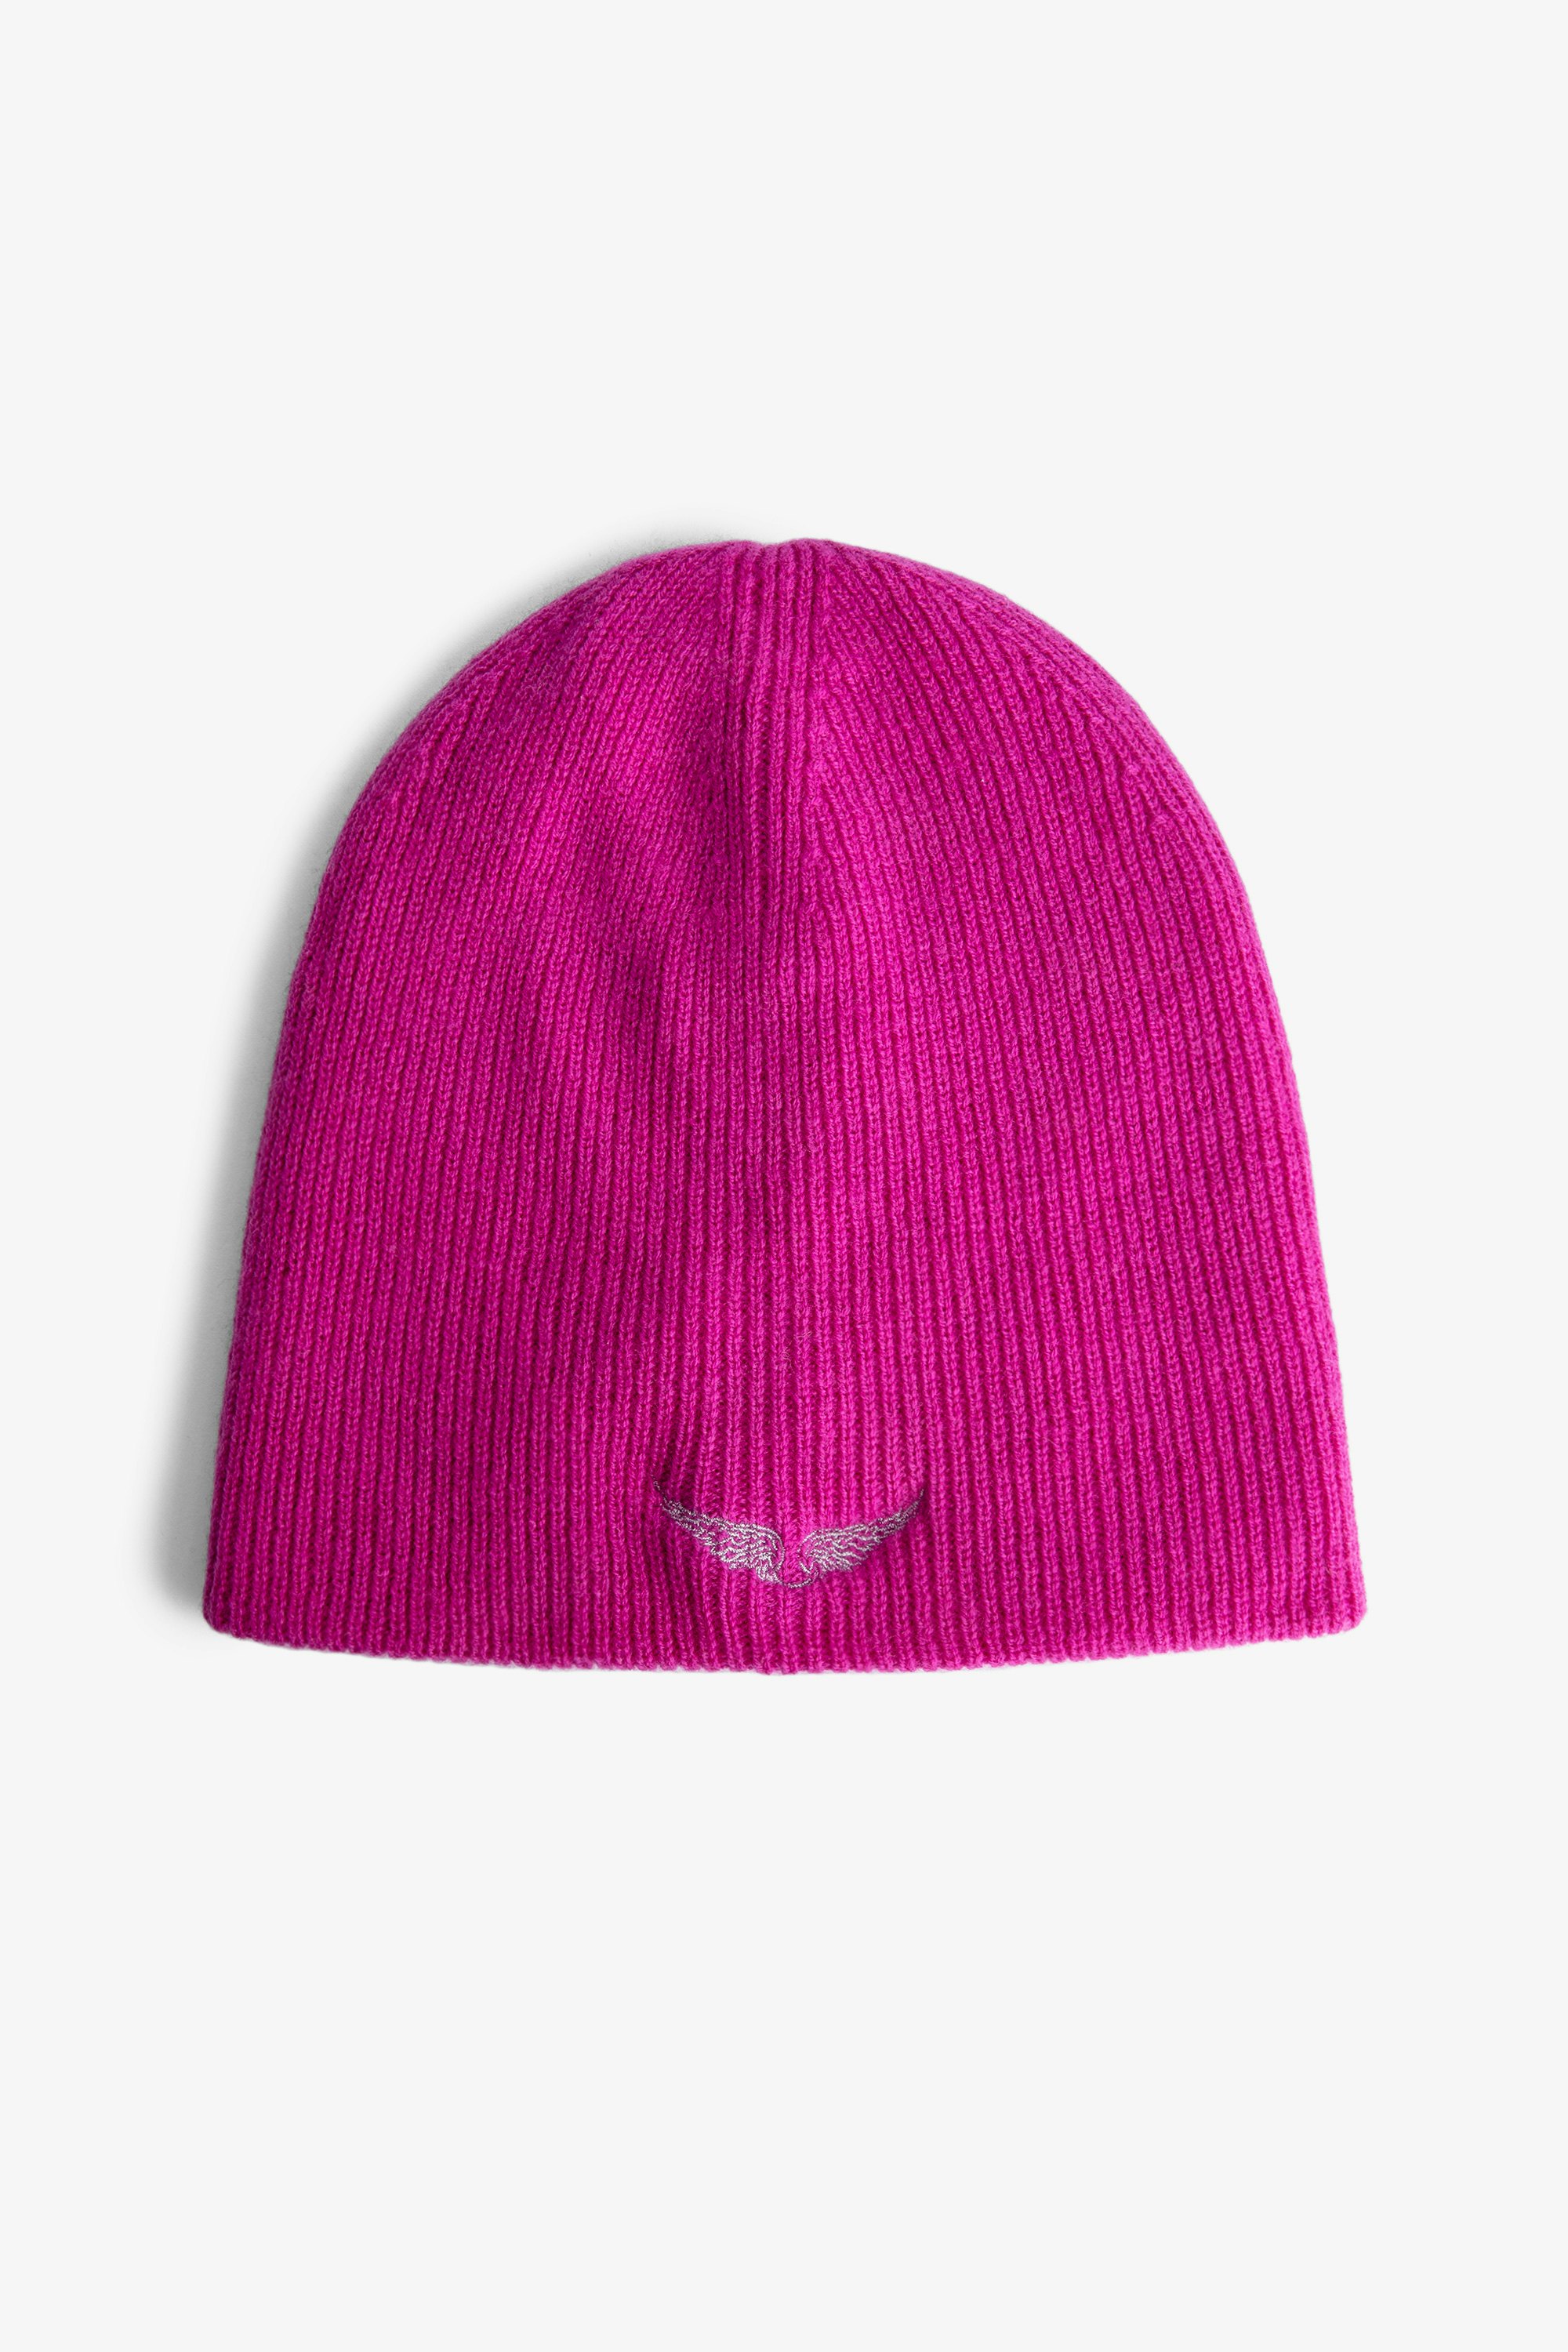 Susana Children’s Beanie  Children’s pink knitted beanie with contrasting wings